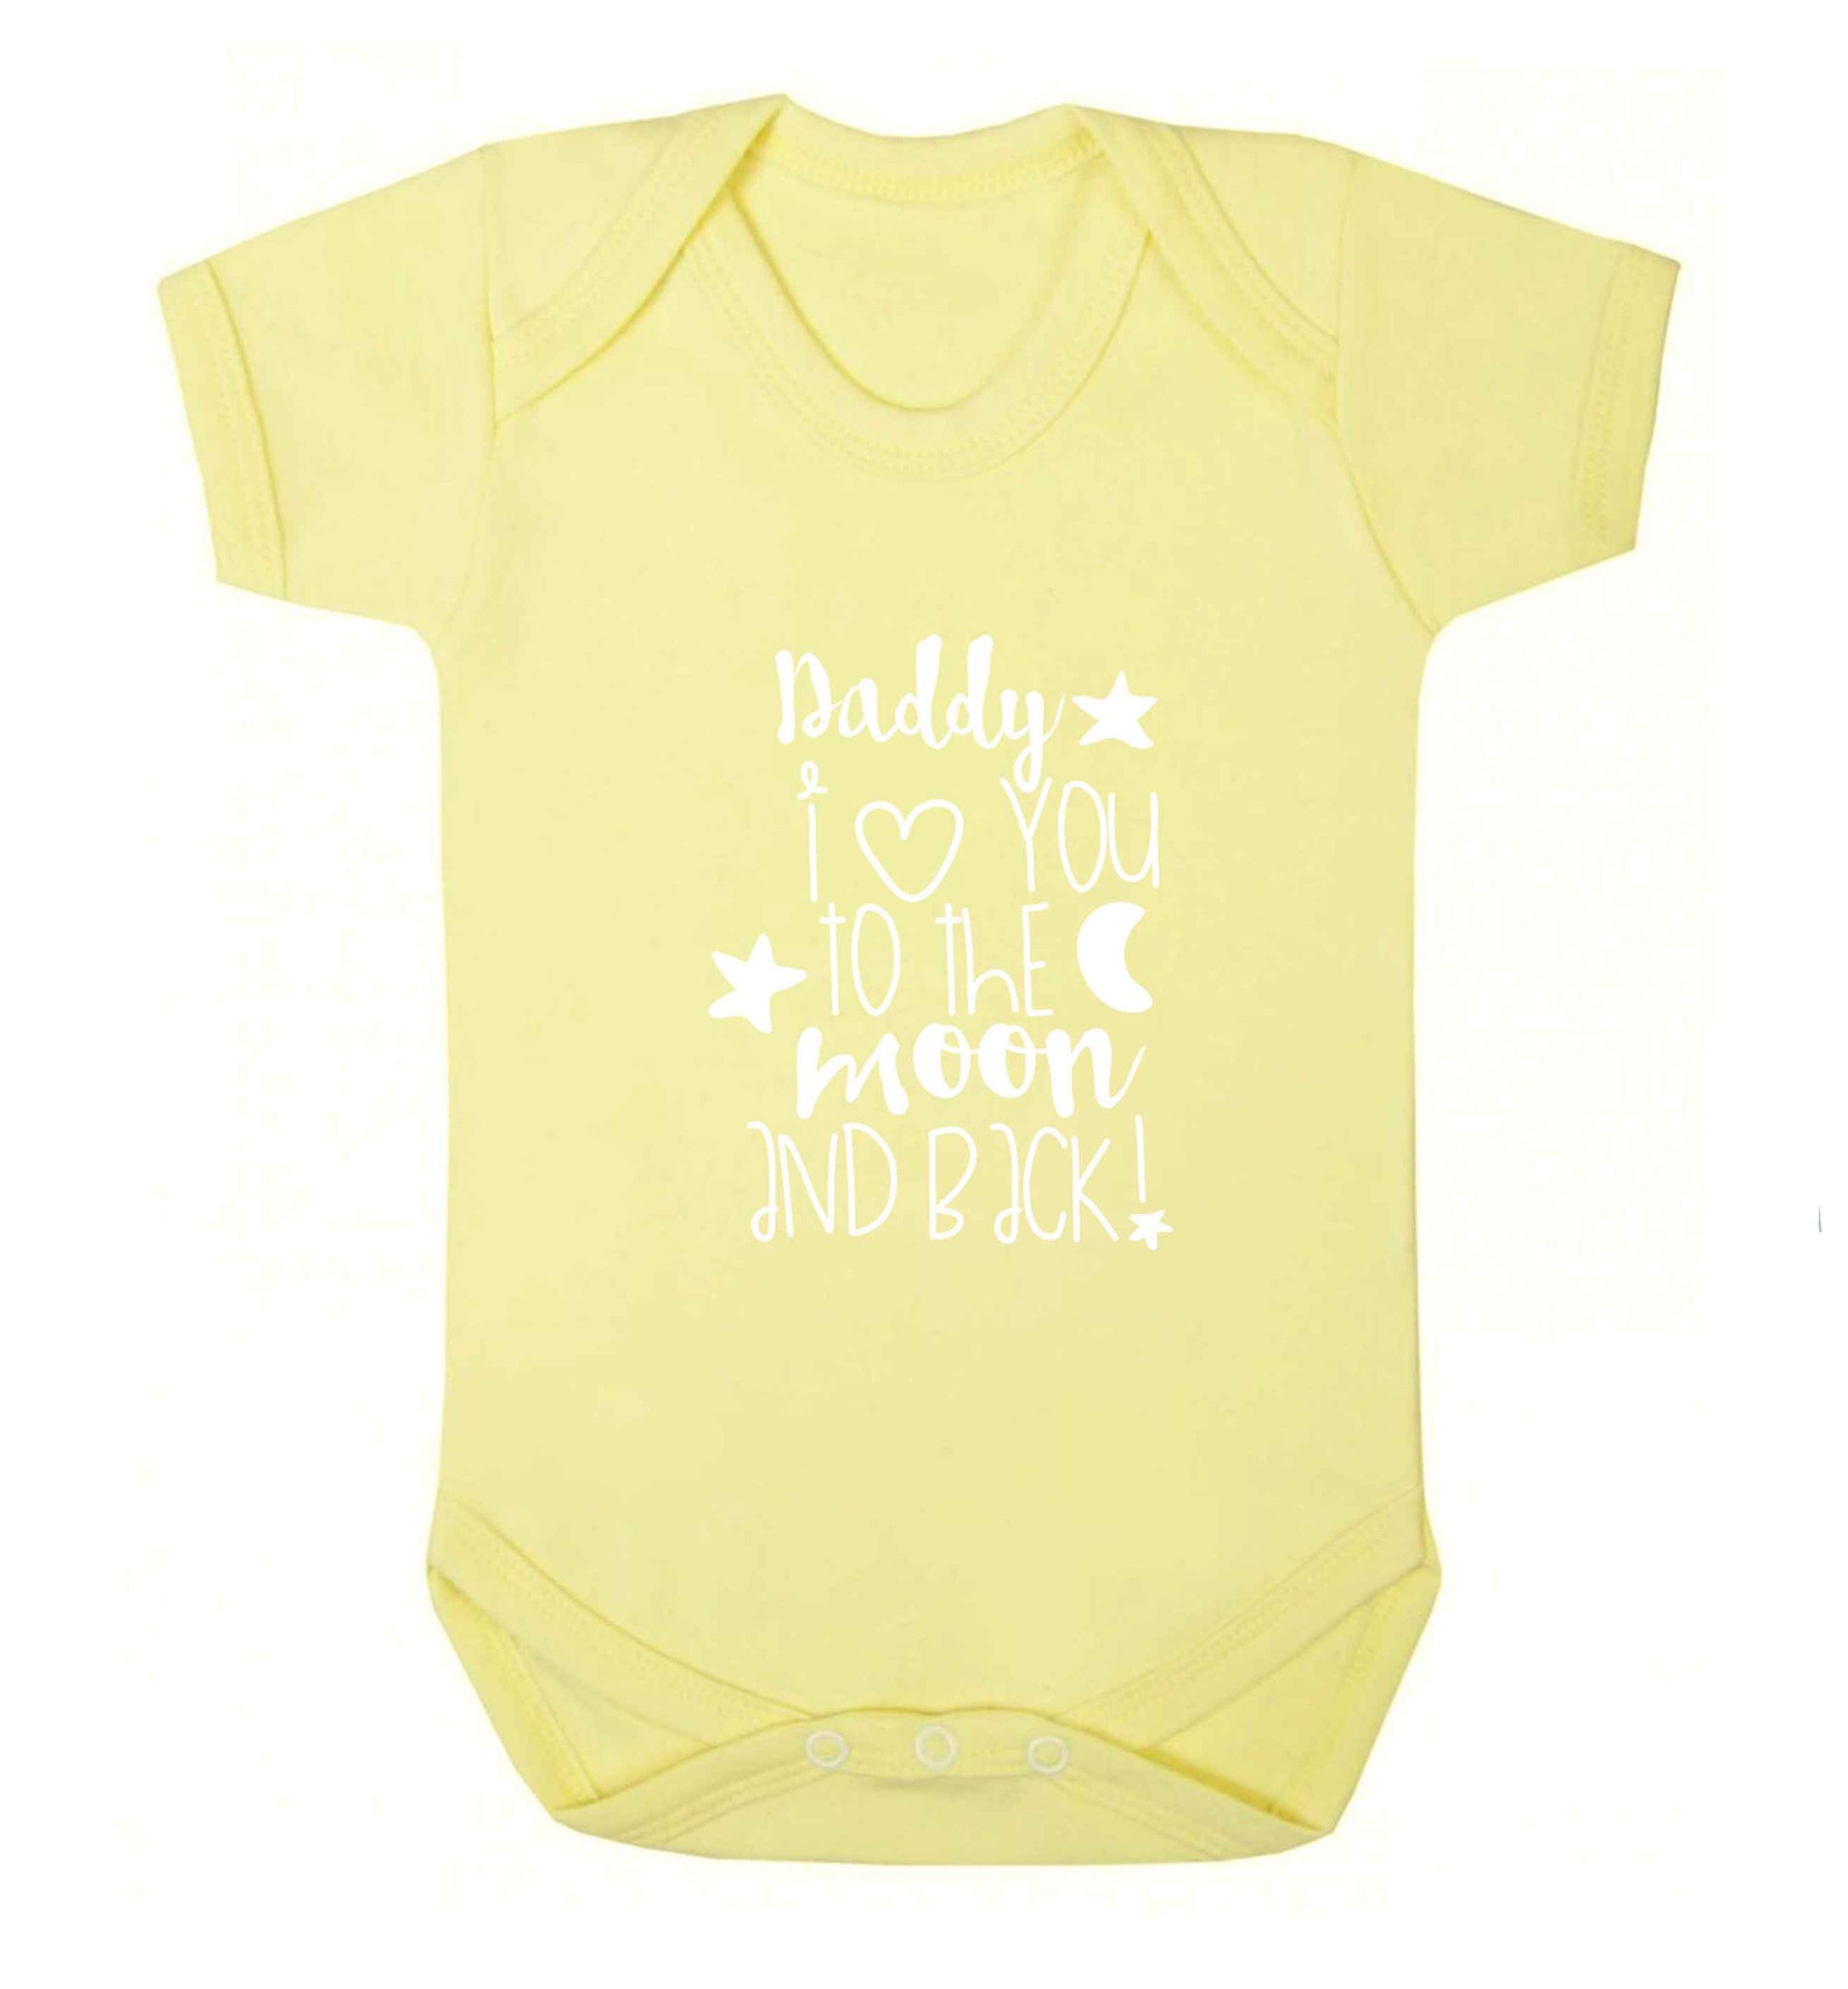 Daddy I love you to the moon and back baby vest pale yellow 18-24 months